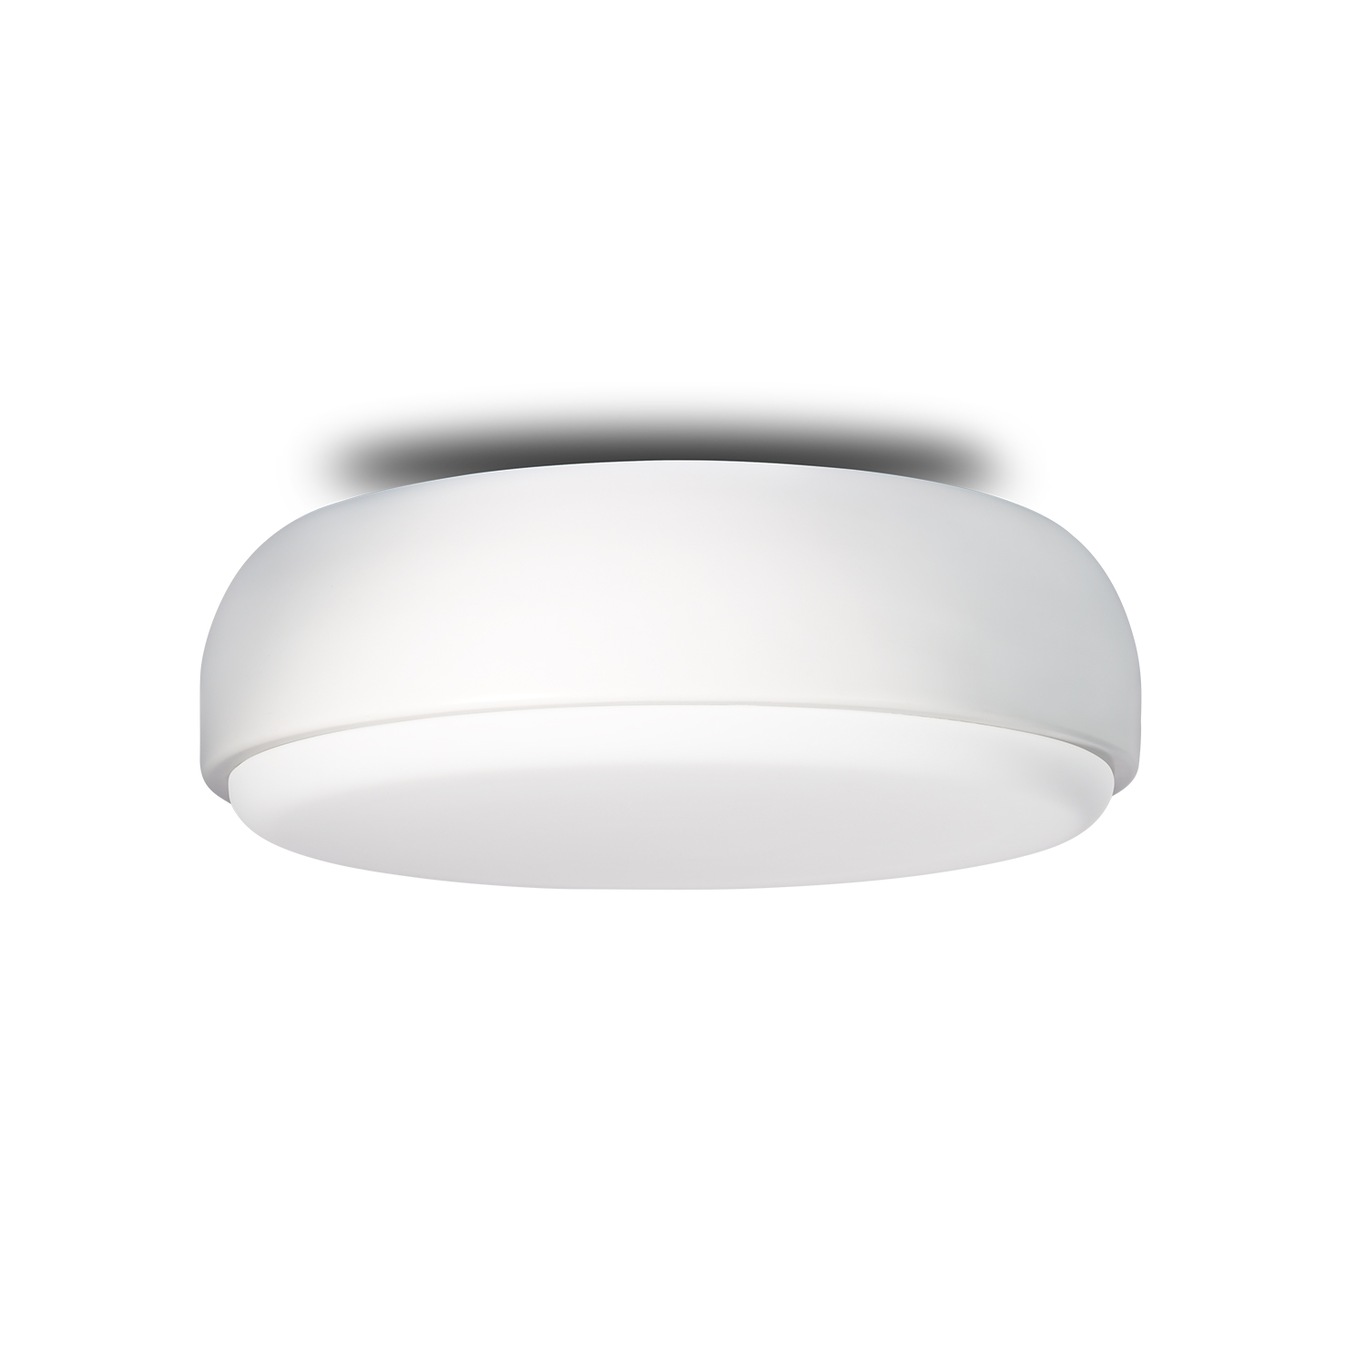 Over Me 40 Ceiling/Wall Lamp, White